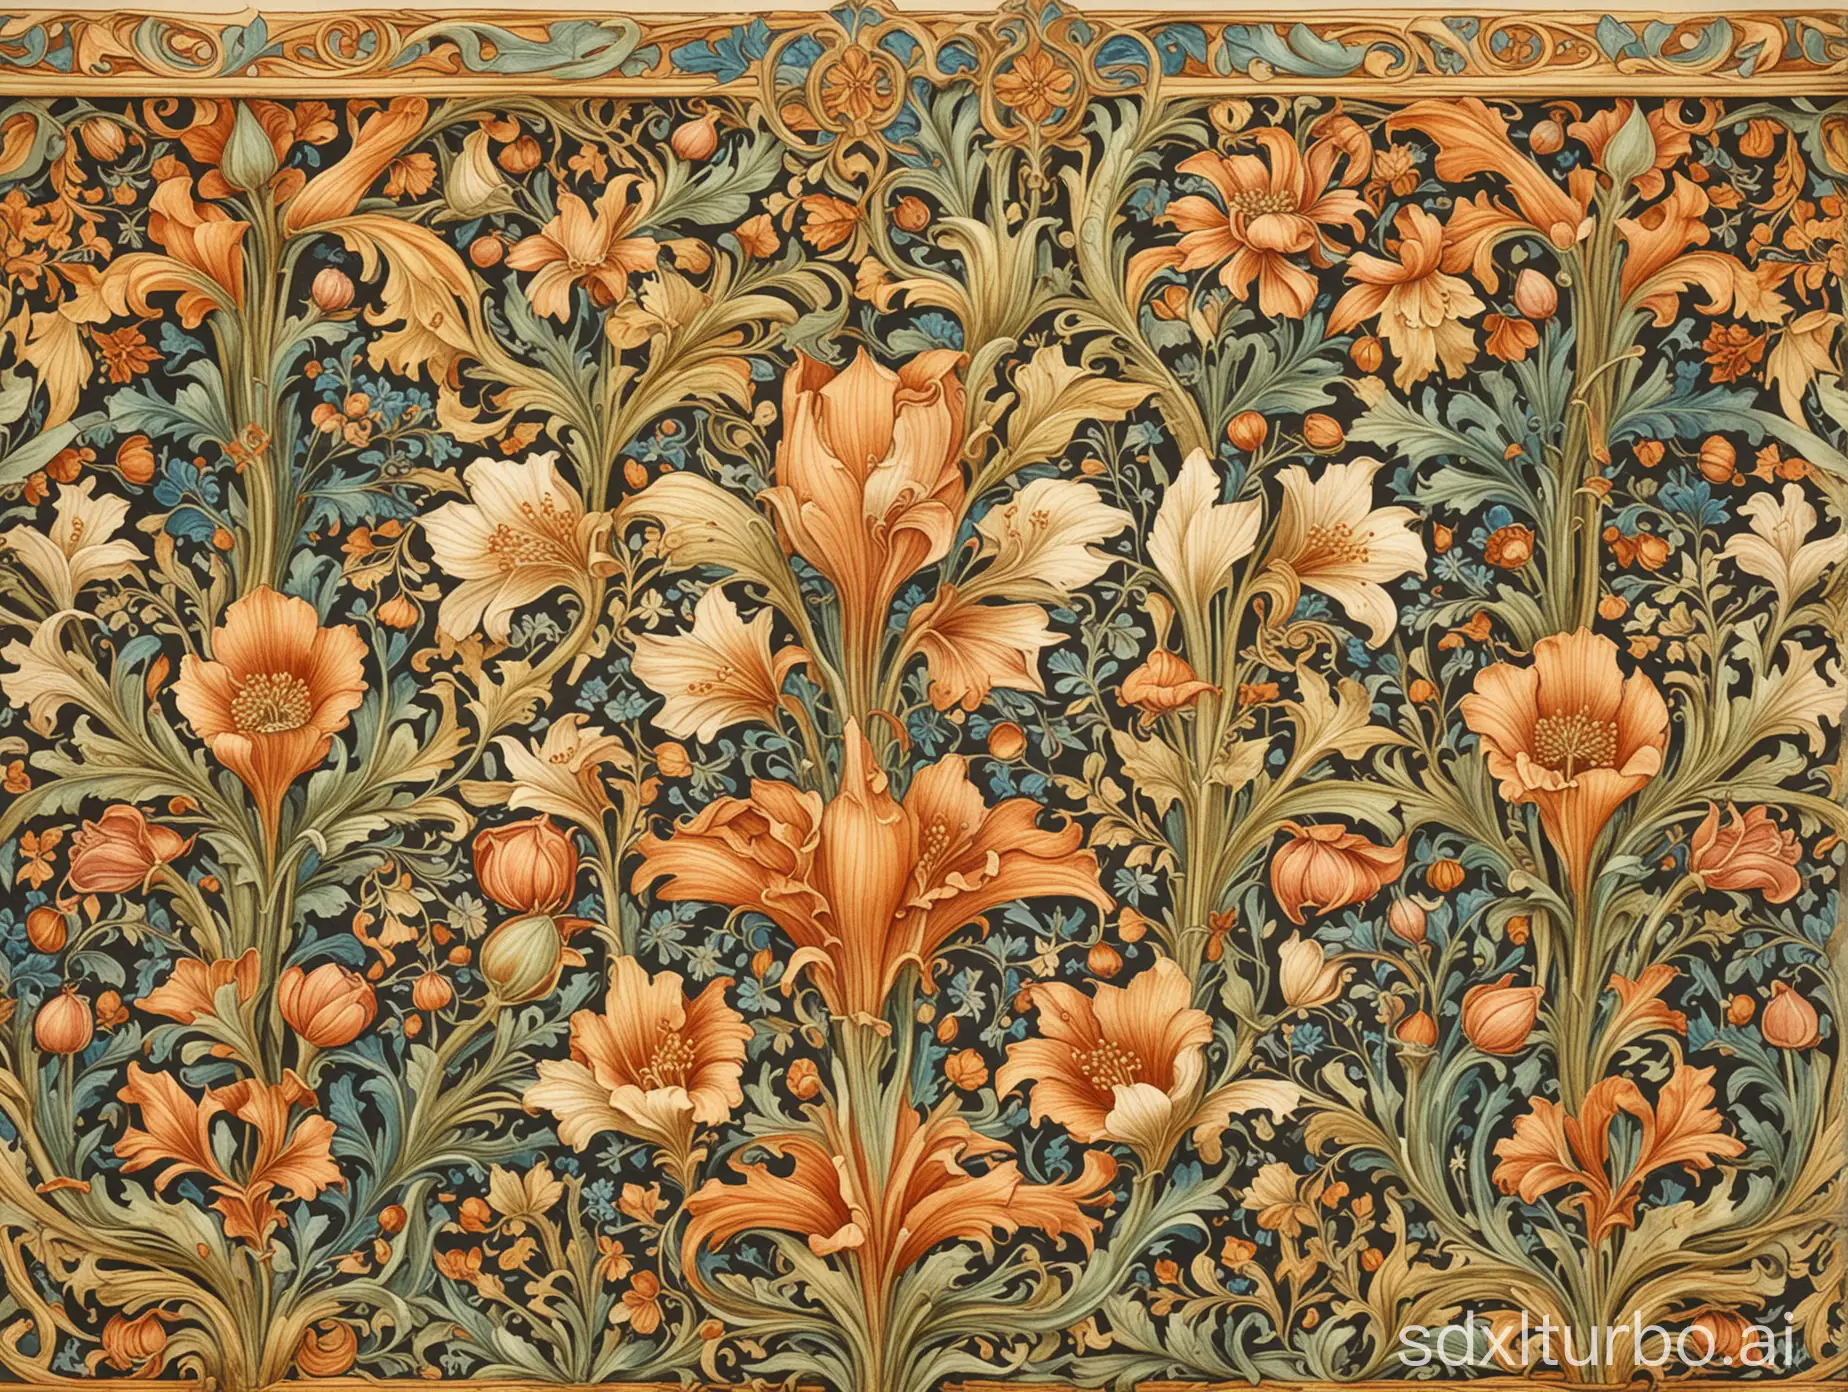 medieval flowers and patterns, art nouveau embellishments, richly detailed delicate and intricate drawing and watercolor painting